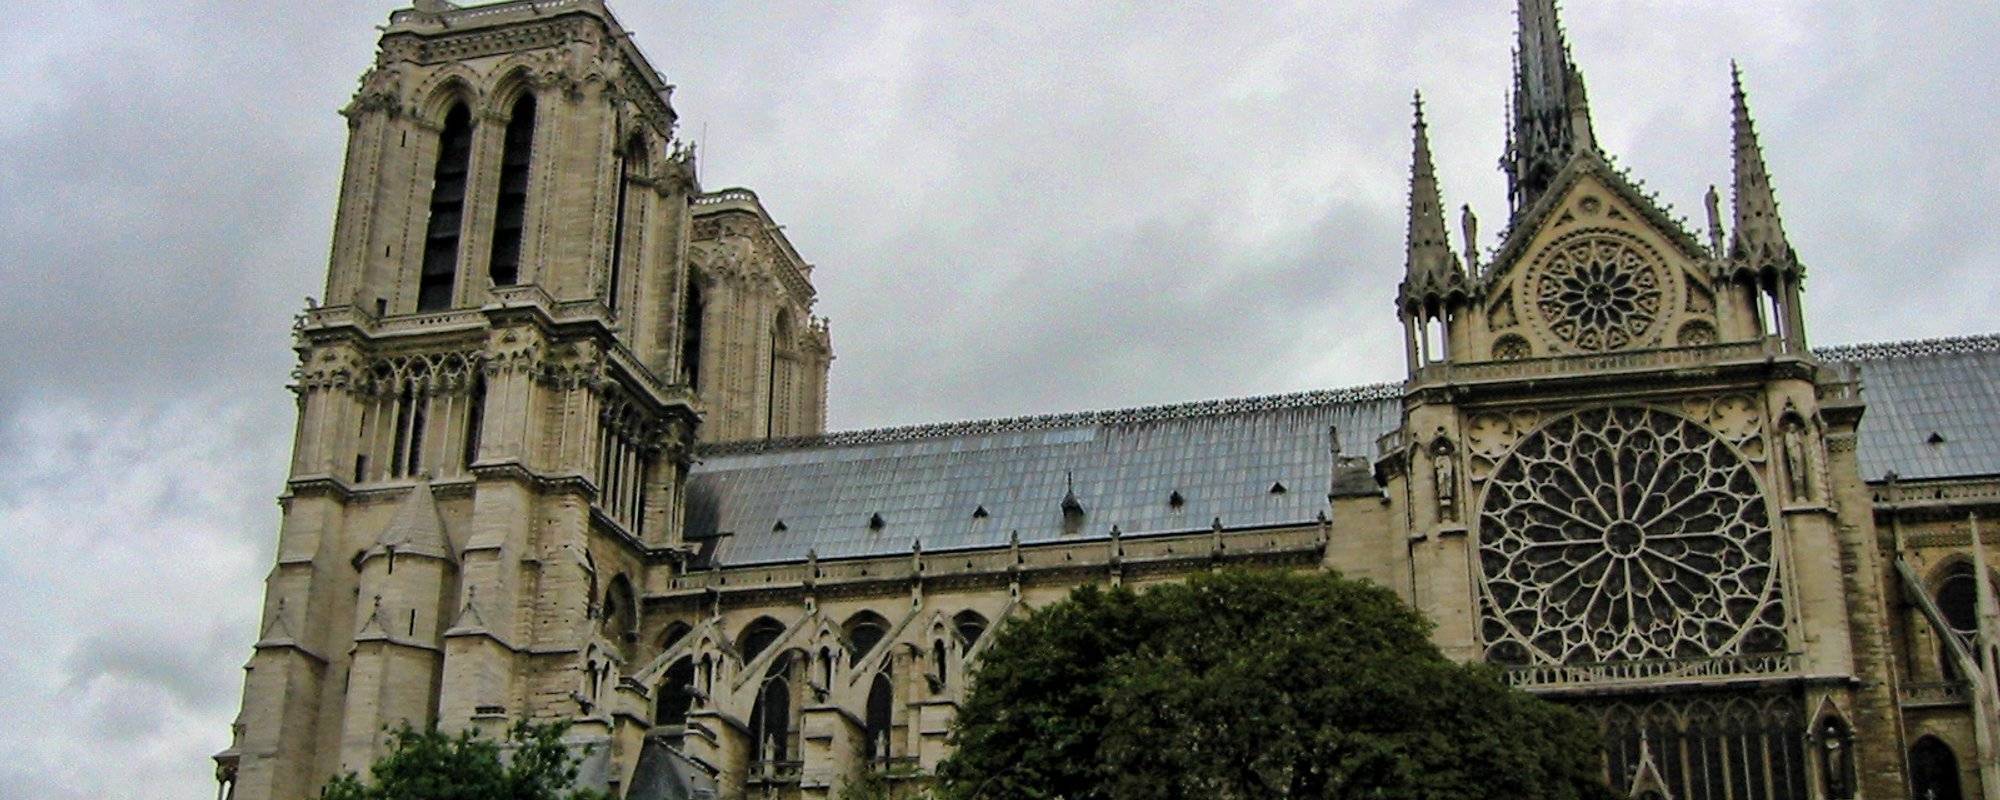 The jewel that devoured the fire-Notre Dame